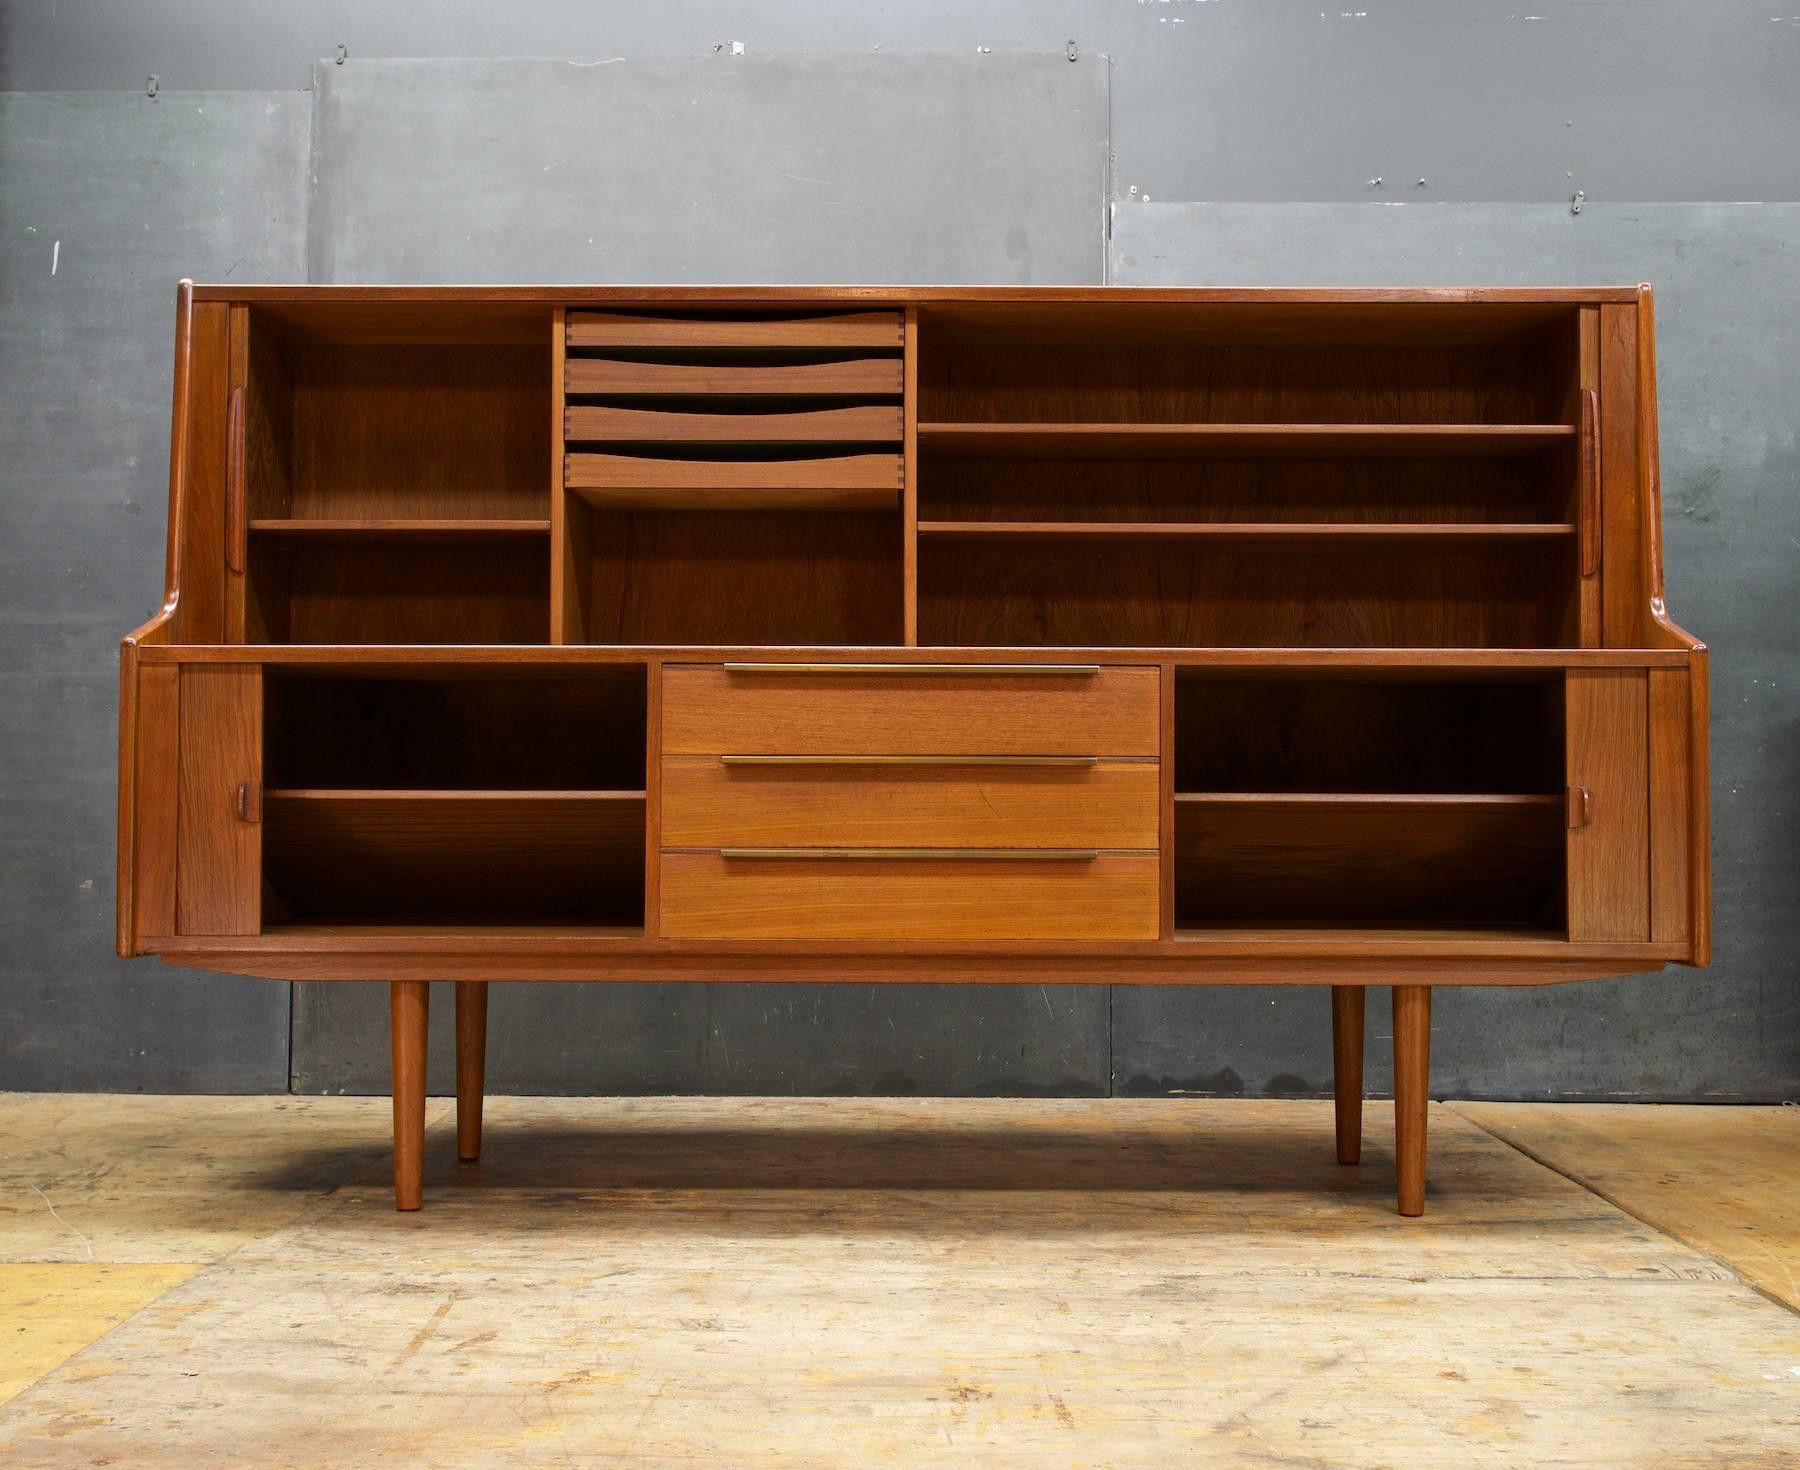 Very large sideboard or cabinet, four fully functioning tambour sliding doors, four flatware drawers, five adjustable shelves. Overall good vintage condition, with some uneven finish on two top surfaces.

Denmark Control Mark inside drawer.